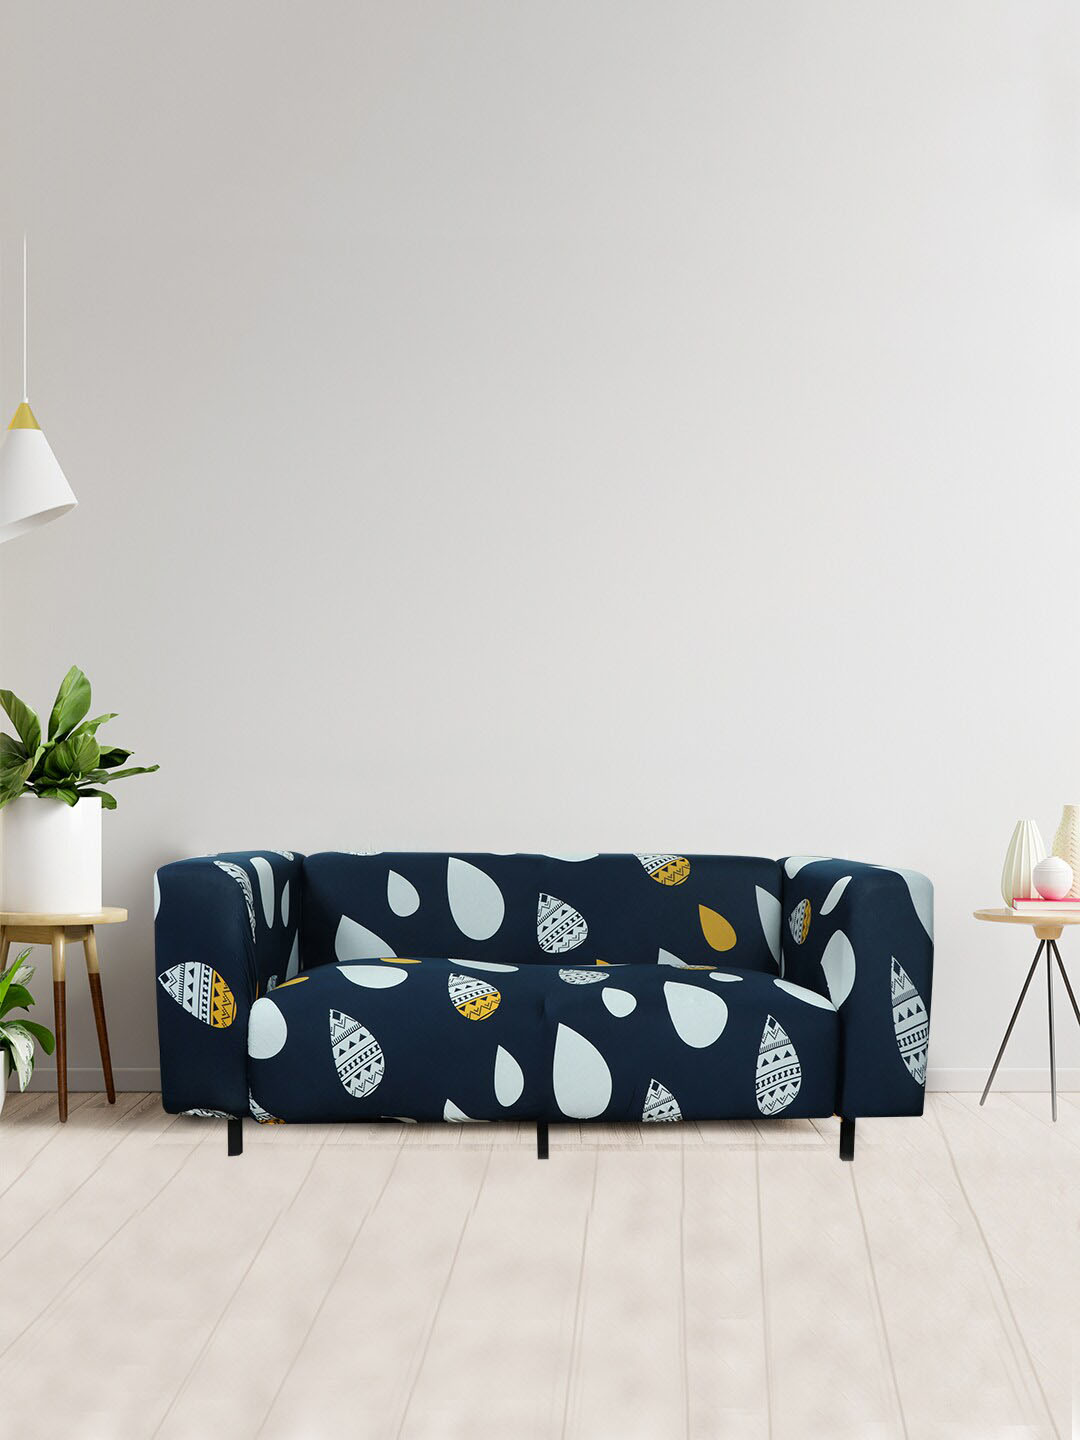 HOUSE OF QUIRK Navy Blue & White Printed 3-Seater Non-Slip Sofa Cover Price in India